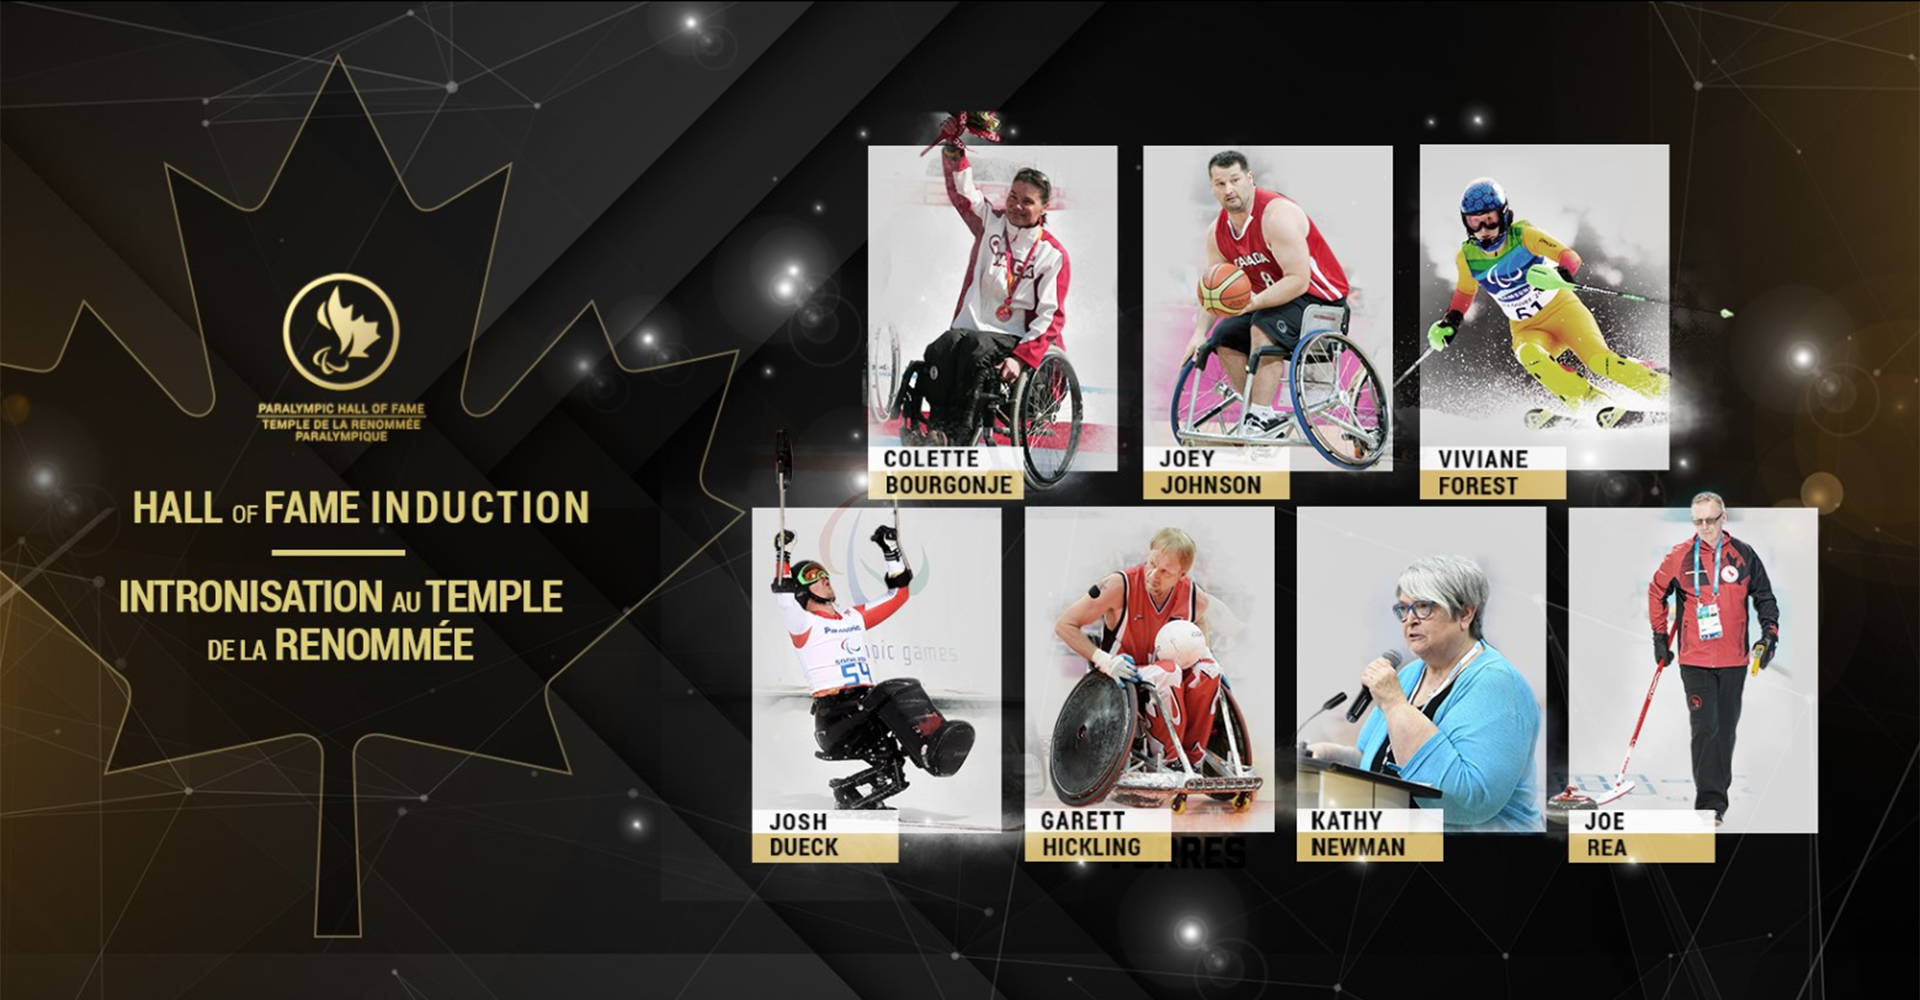 Garett Hickling and Kathy Newman named to Canadian Paralympic Hall of Fame